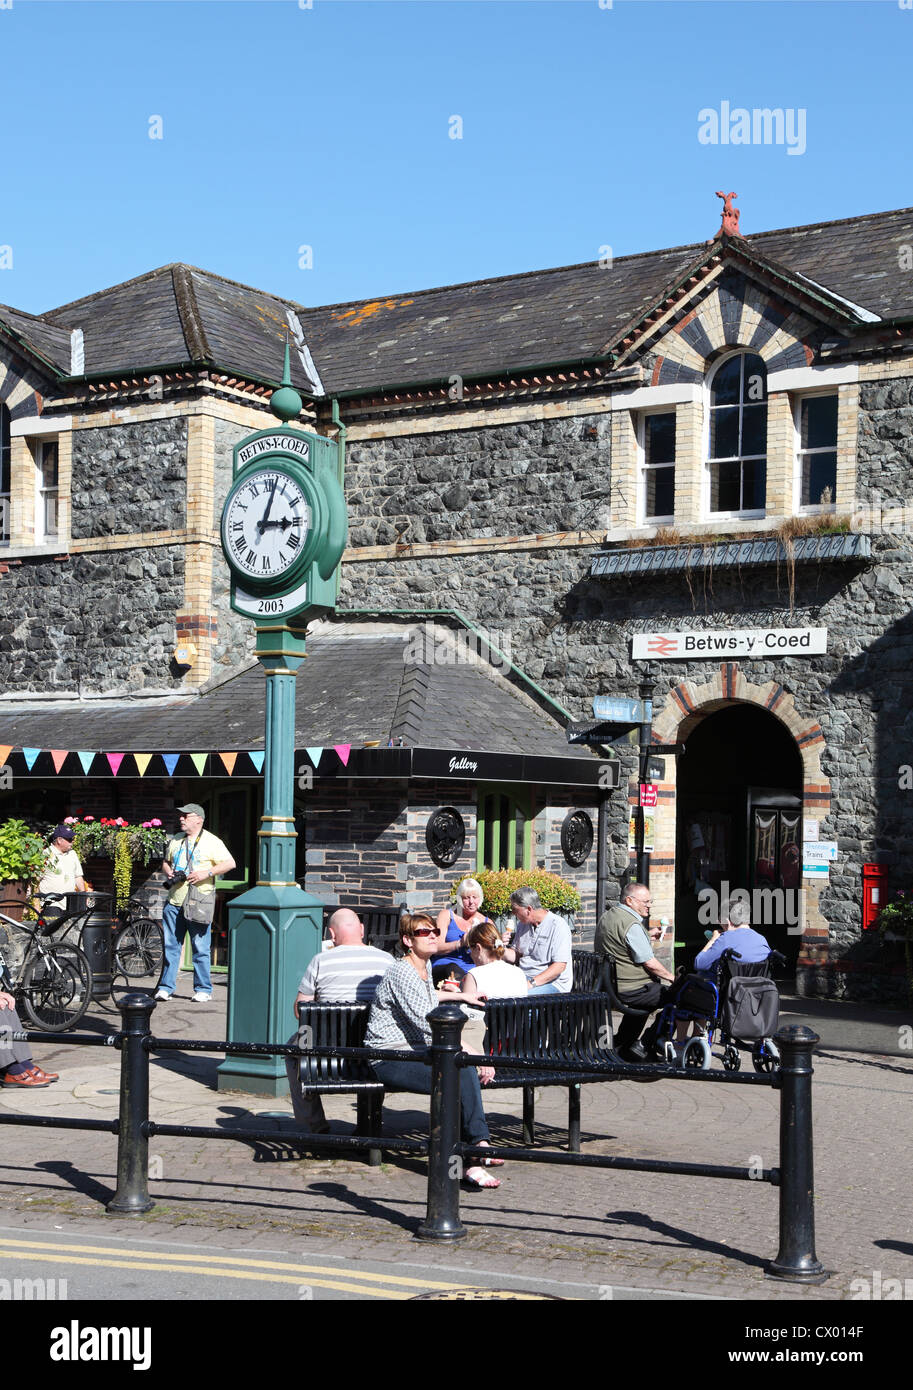 Les gens assis dehors Betws y Coed railway station North Wales, UK Banque D'Images